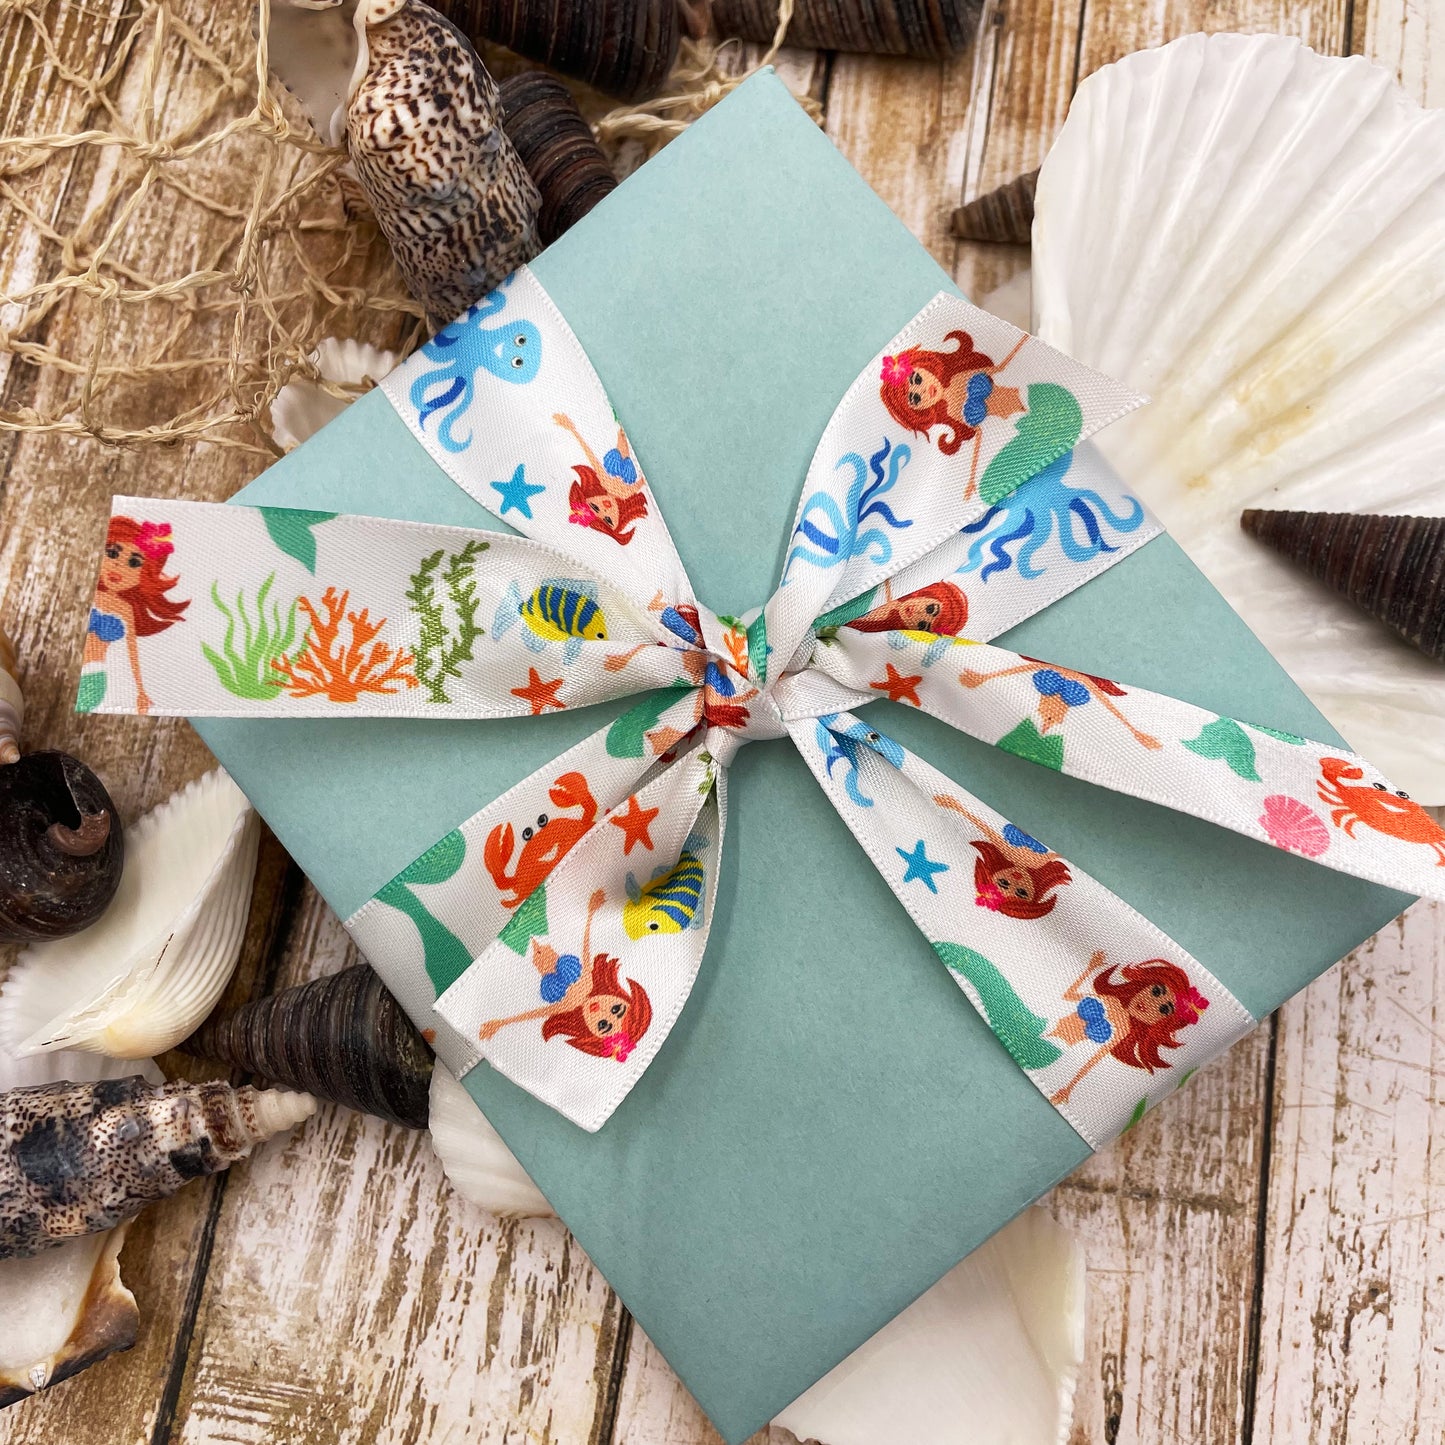 Tie our lovely Mermaid ribbon on white on a gift package to make a lovely Under the Sea themed gift!